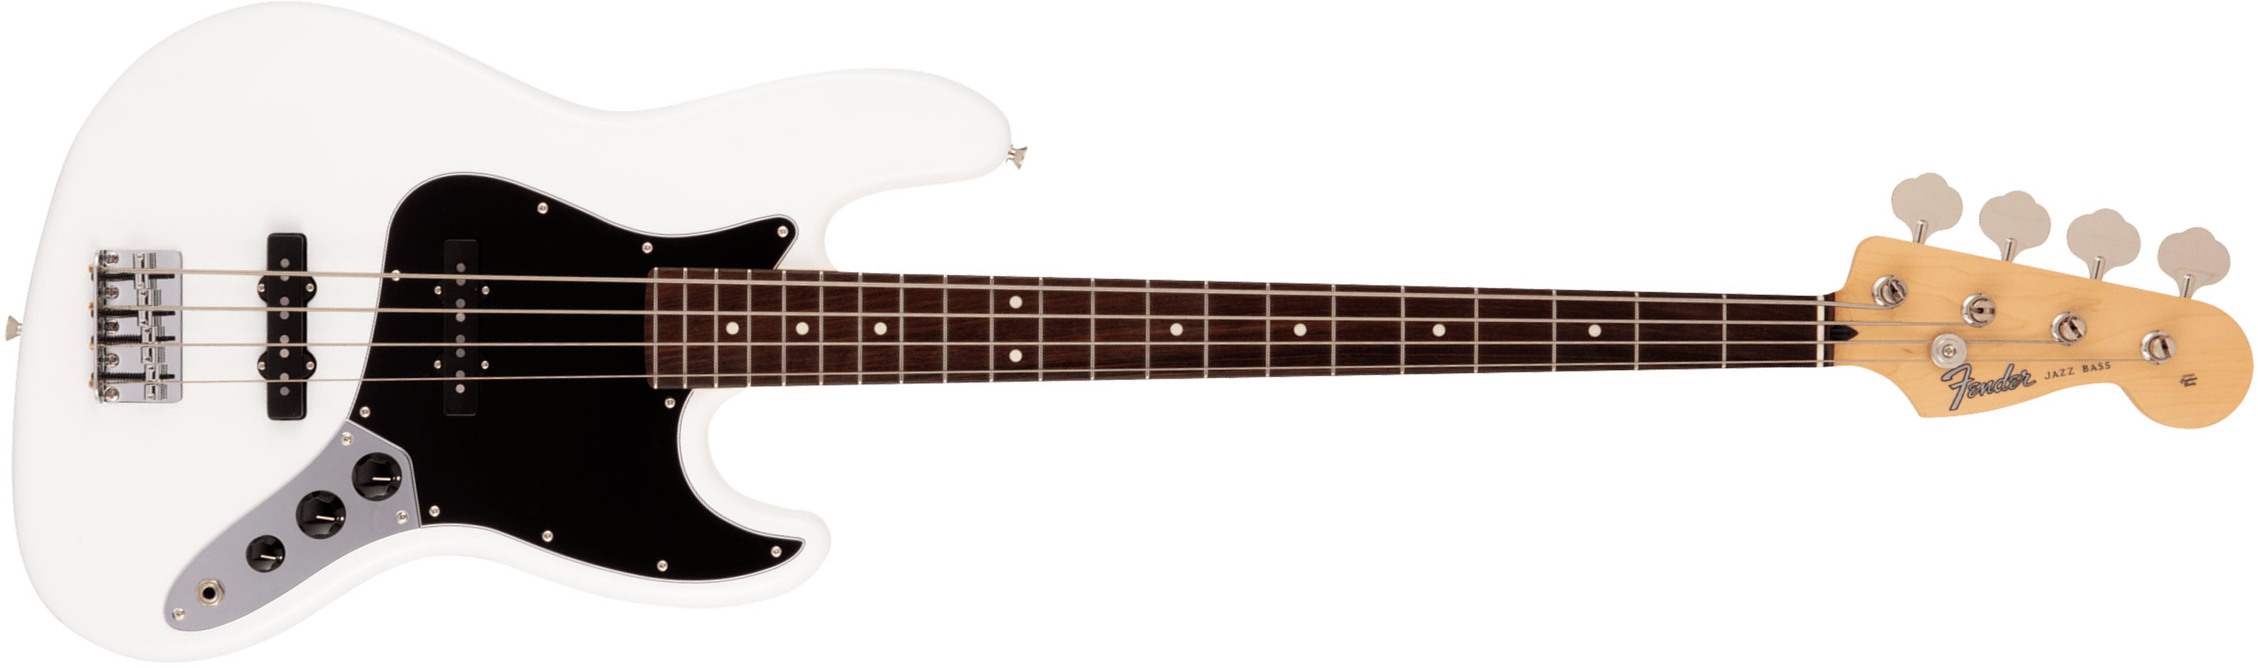 Fender Jazz Bass Hybrid Ii Mij Jap 2s Trem Rw - Arctic White - Solid body electric bass - Main picture